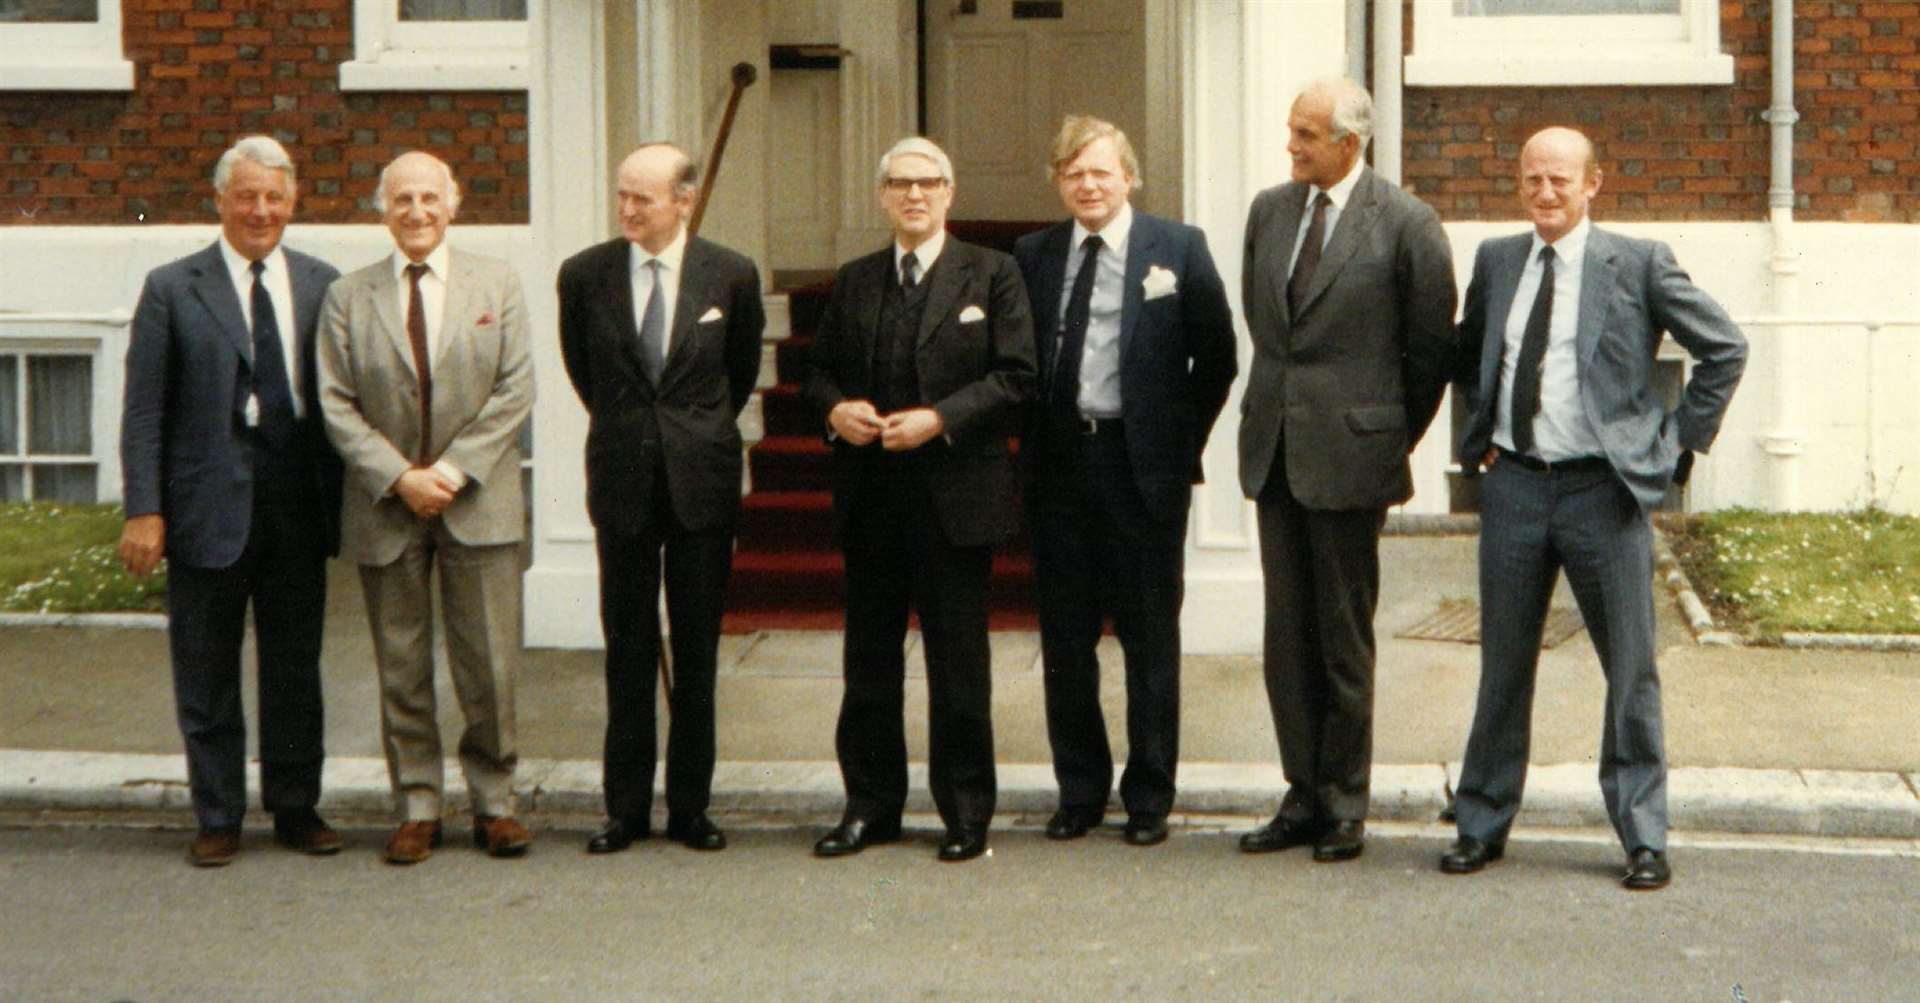 The first board of Trustees in a picture taken on March 30, 1984 with Sir Steuart Pringle in the centre